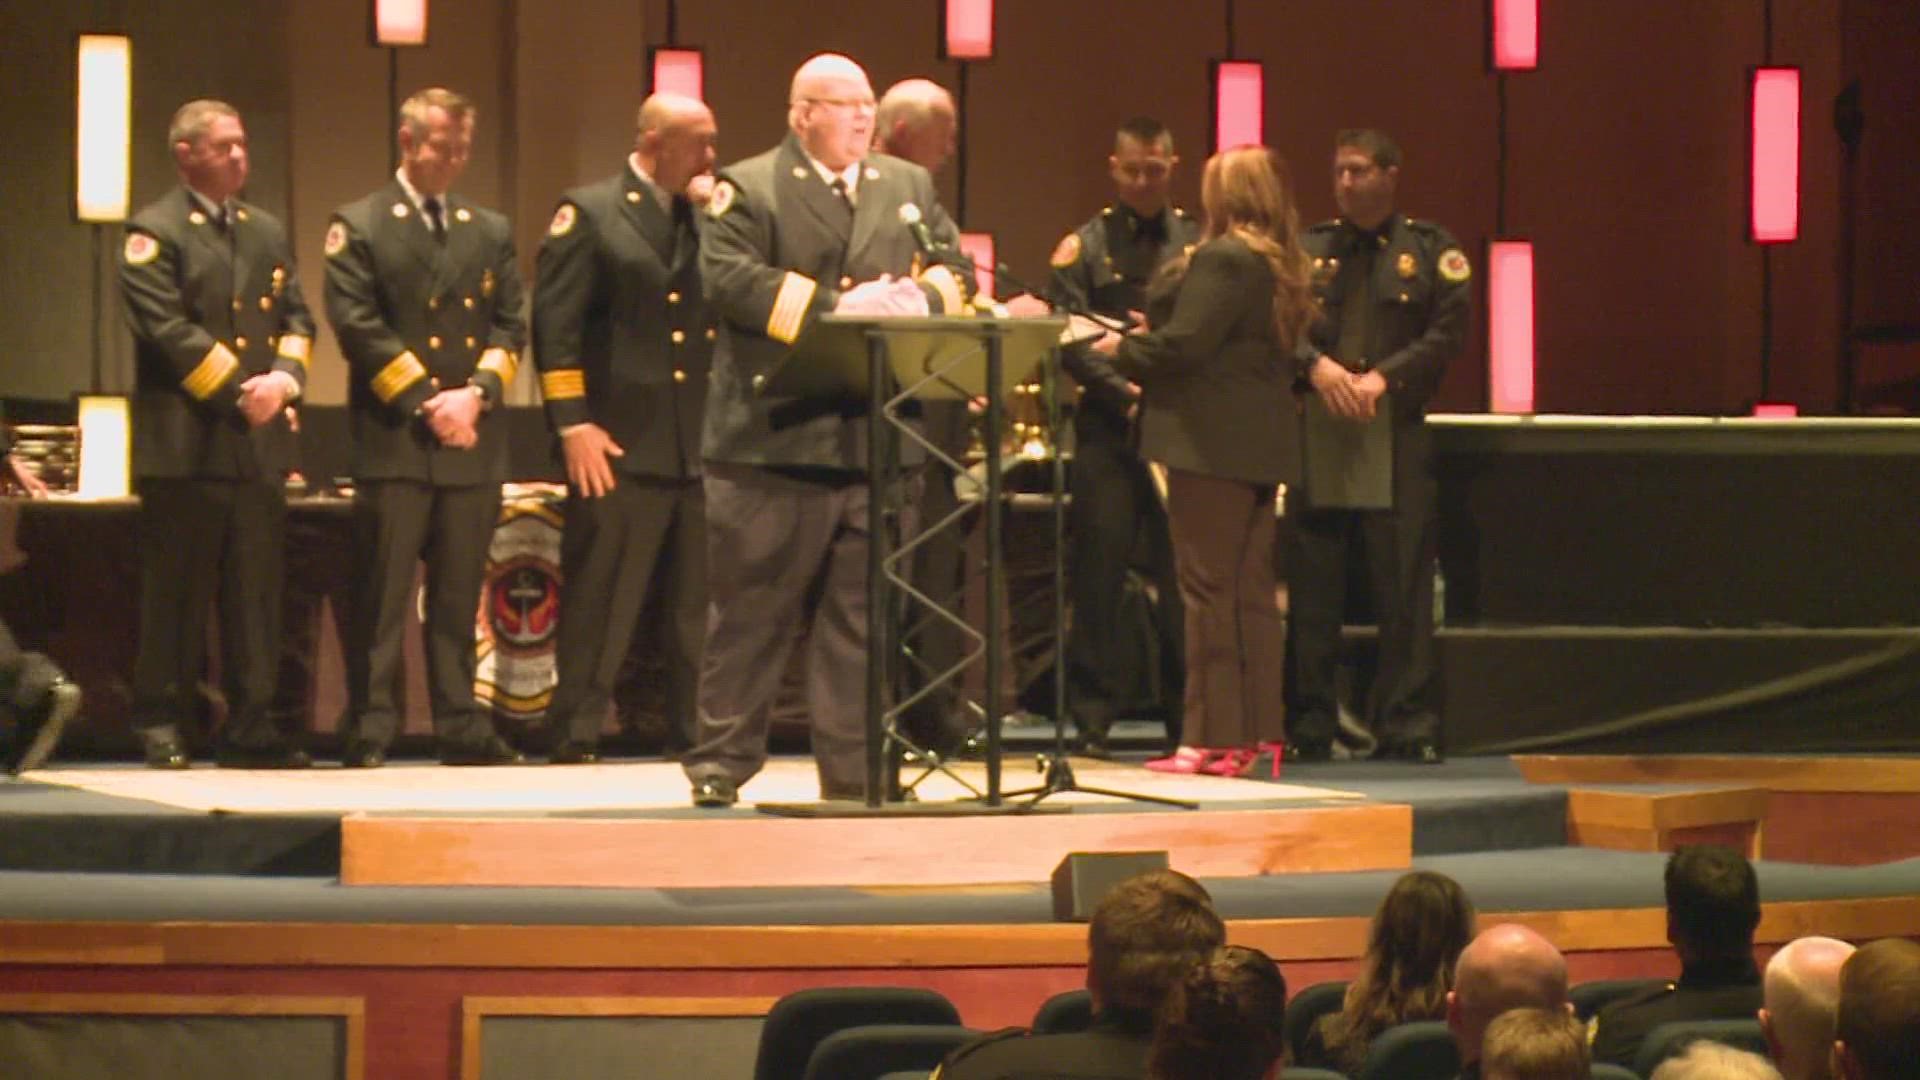 Captain Jared Durtche and firefighter-paramedic Paul Edelen received the department's highest honor Monday.